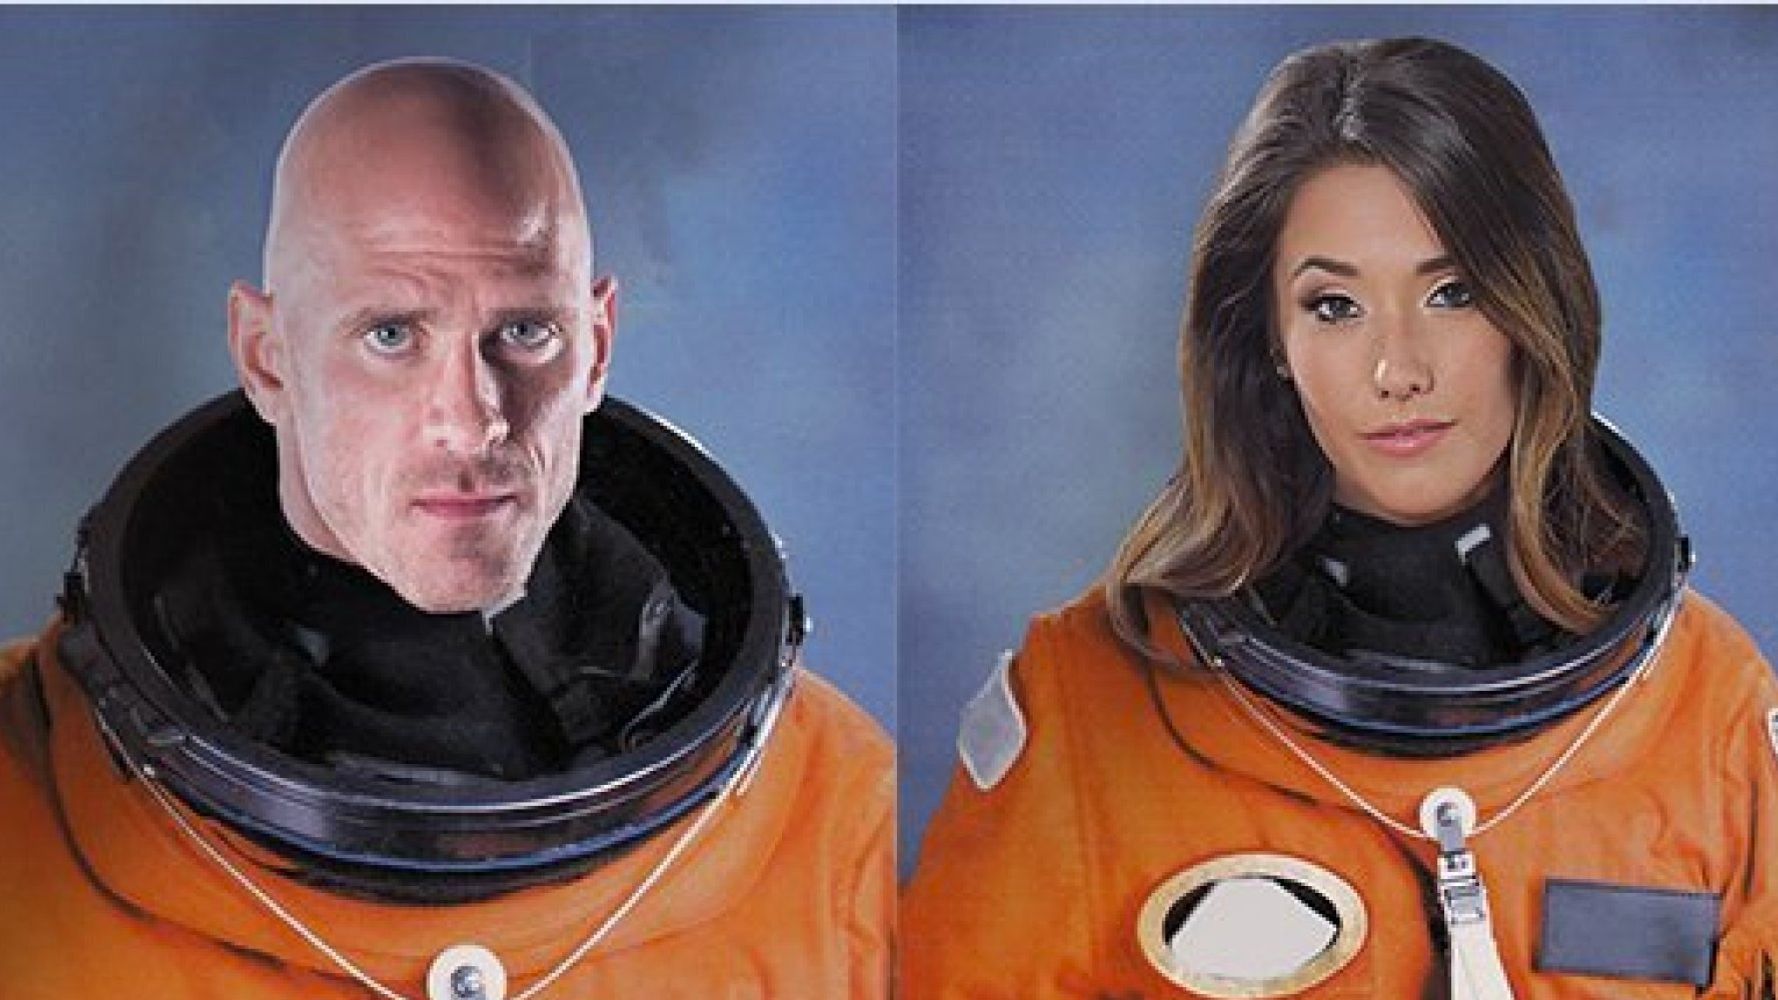 Johnny Sins Force To Fuck Vifeos - Pornhub Crowdfunding First Sex In Space Film Starring Johnny Sins And Eva  Lovia | HuffPost UK Tech